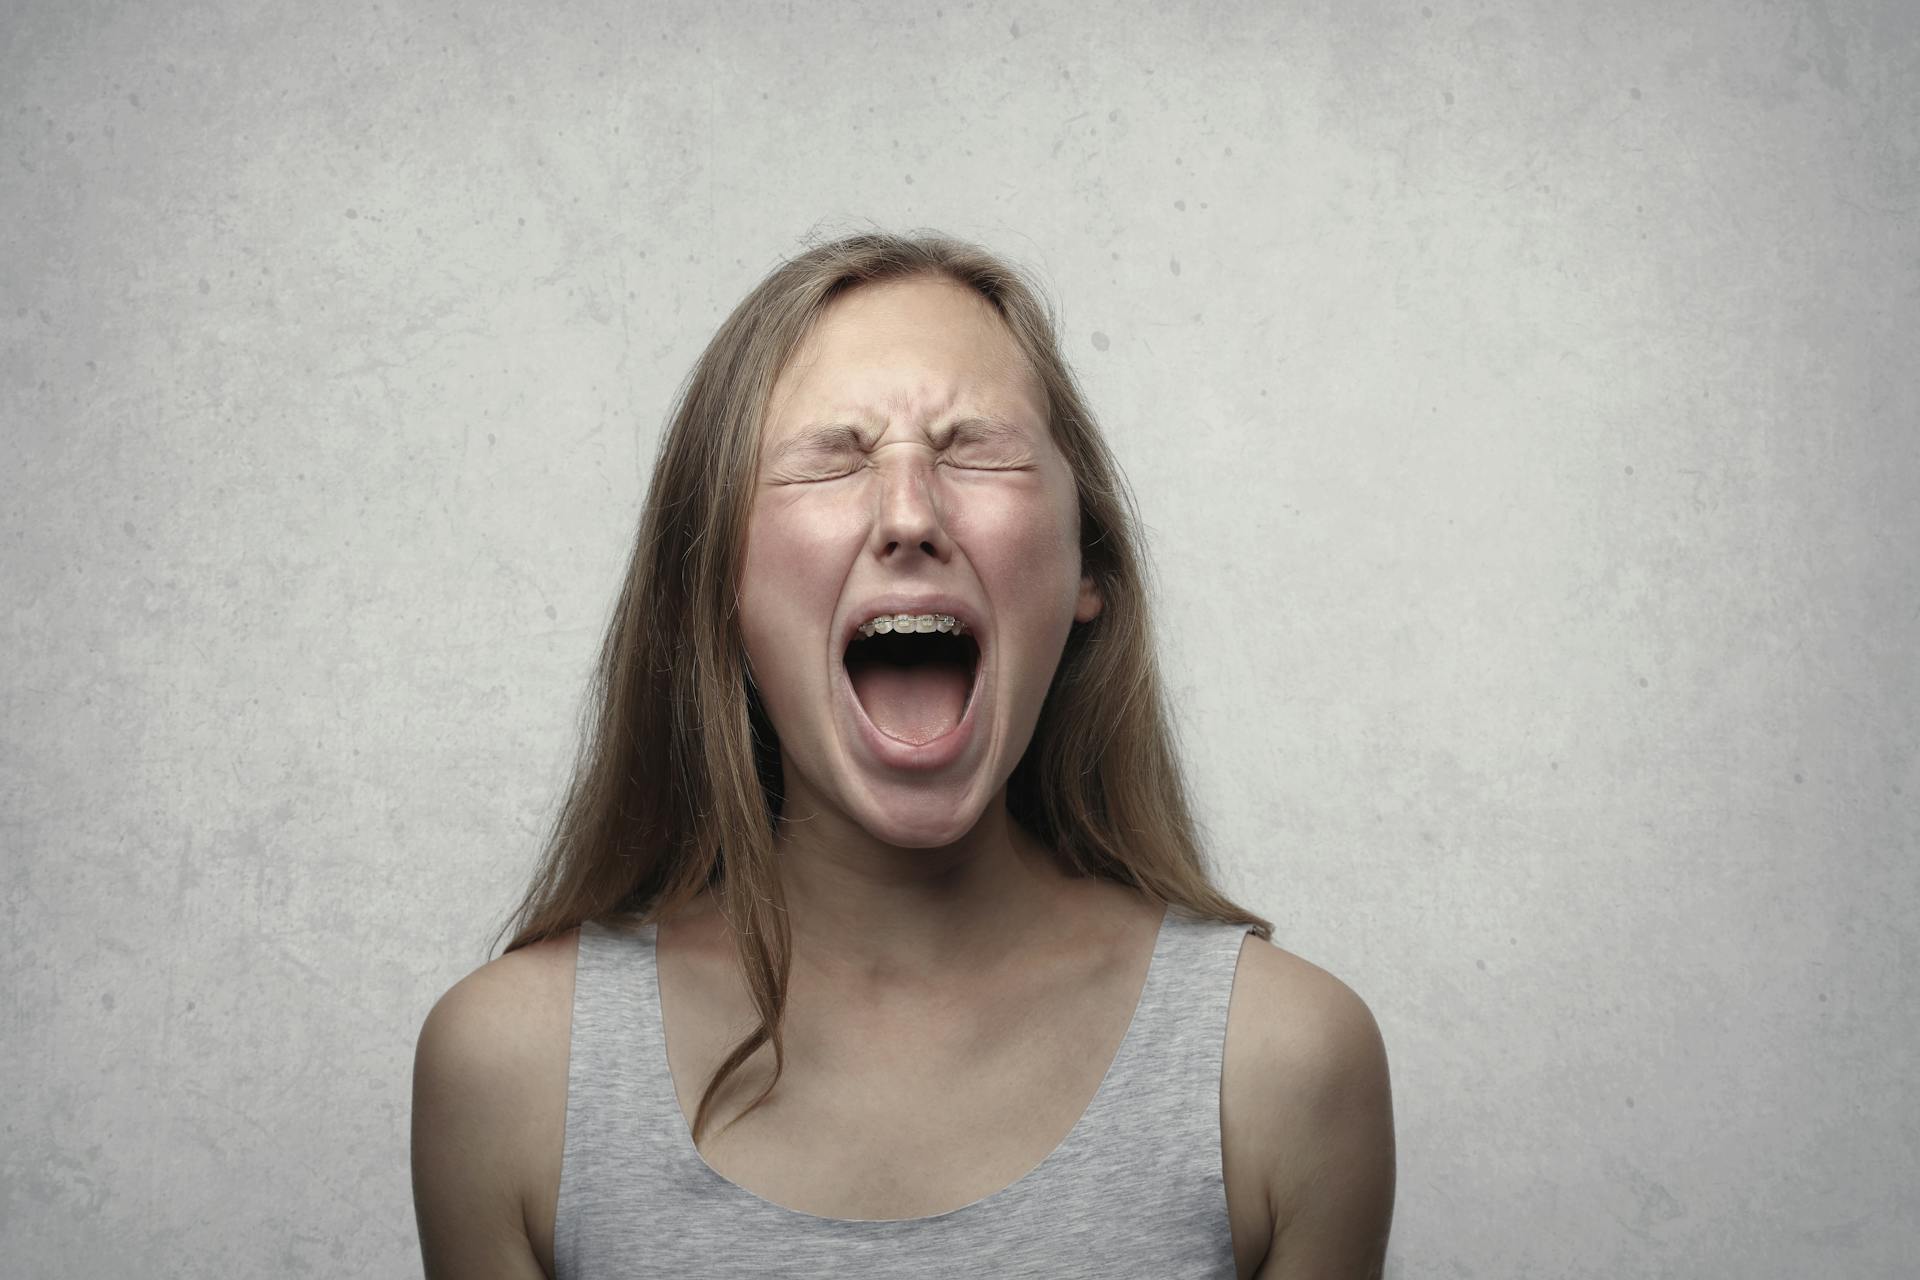 An angry woman screaming | Source: Pexels